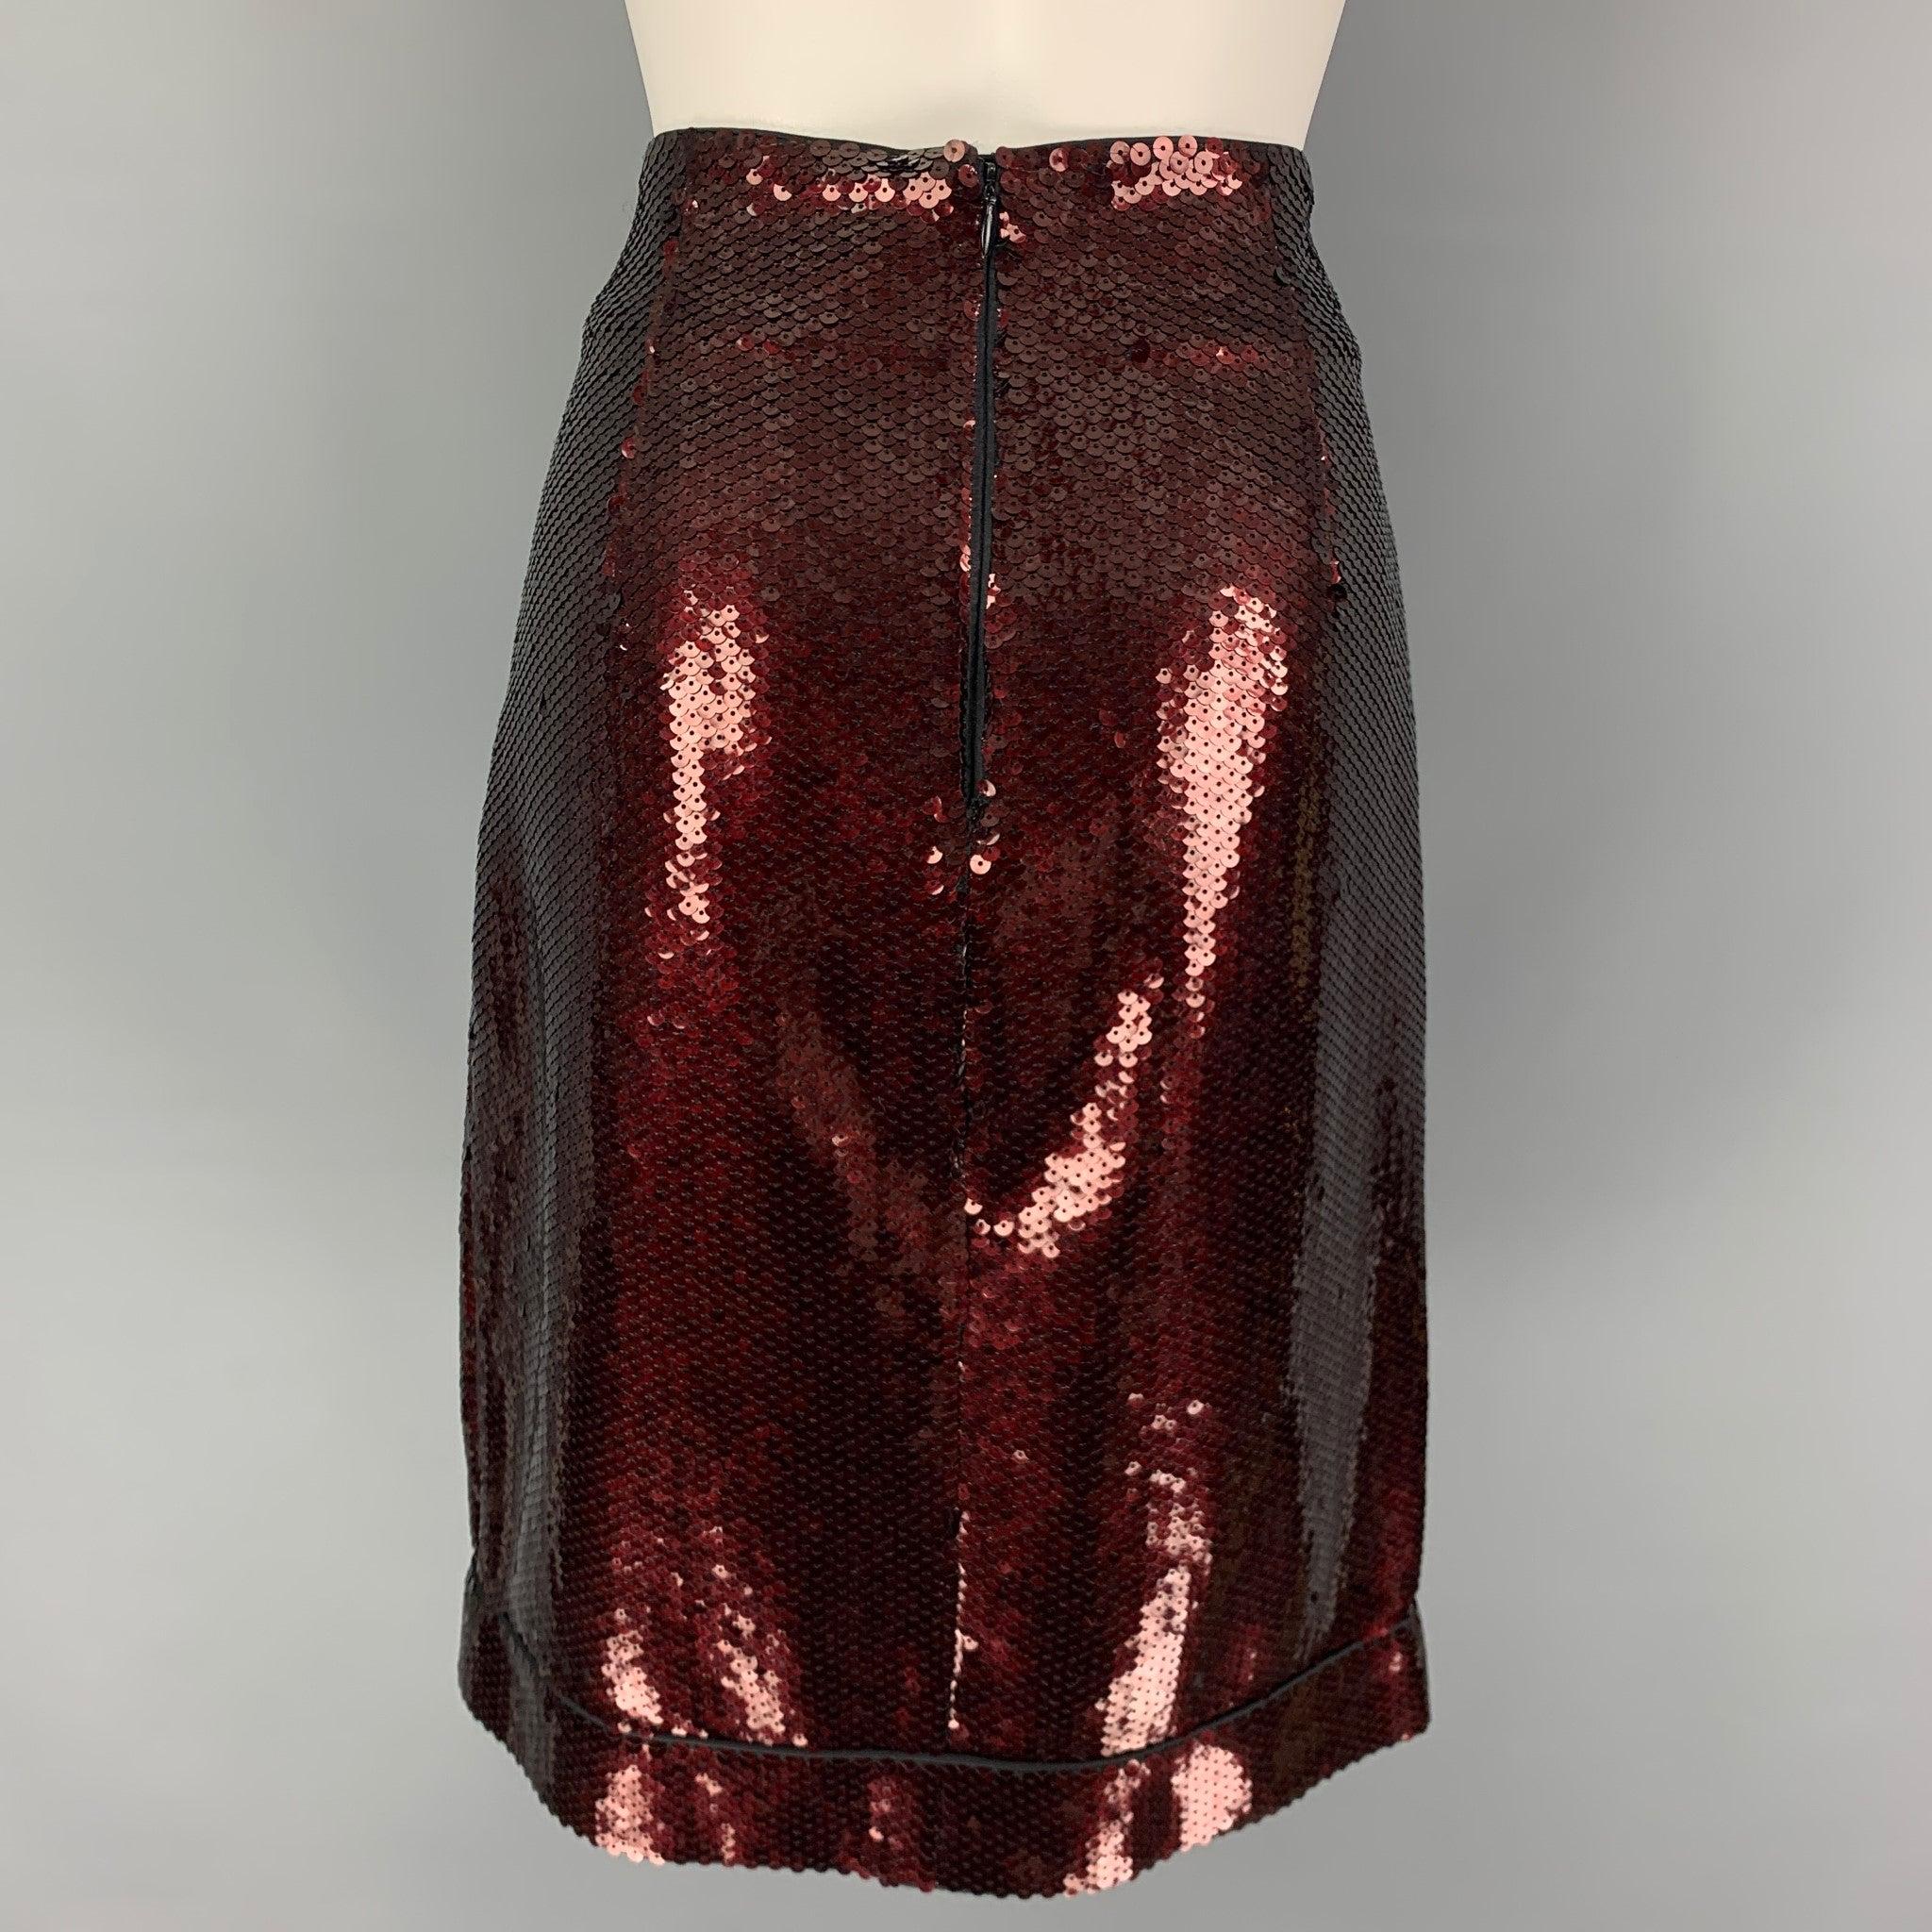 MARC JACOBS Size 6 Burgundy Black Polyester Blend Sequined A-Line Skirt In Good Condition For Sale In San Francisco, CA